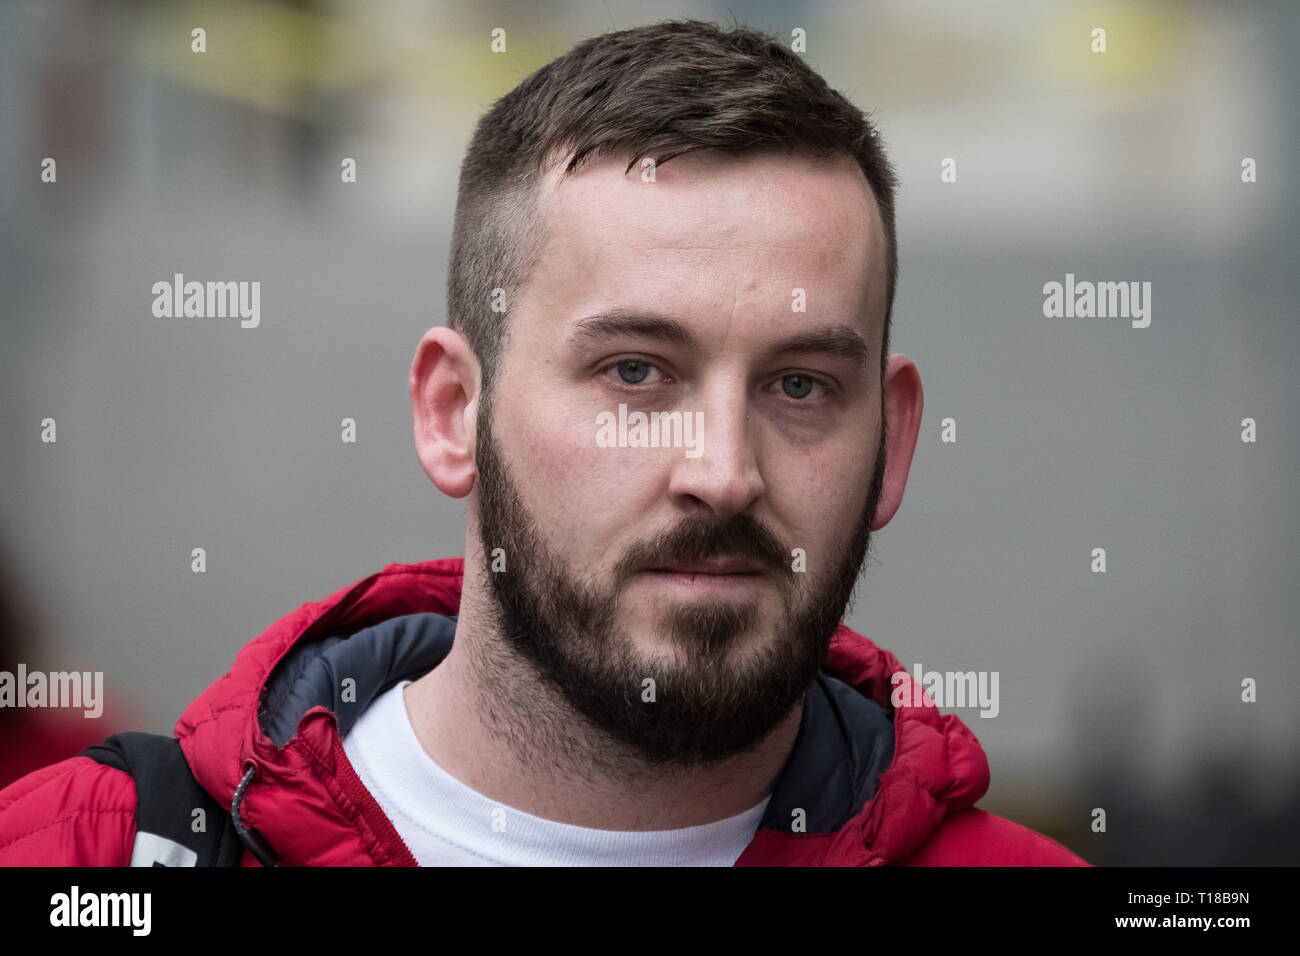 London, UK. 19th March 2019. James Goddard arrives at Westminster Magistrates' Court. Credit: Guy Corbishley/Alamy Live News Stock Photo